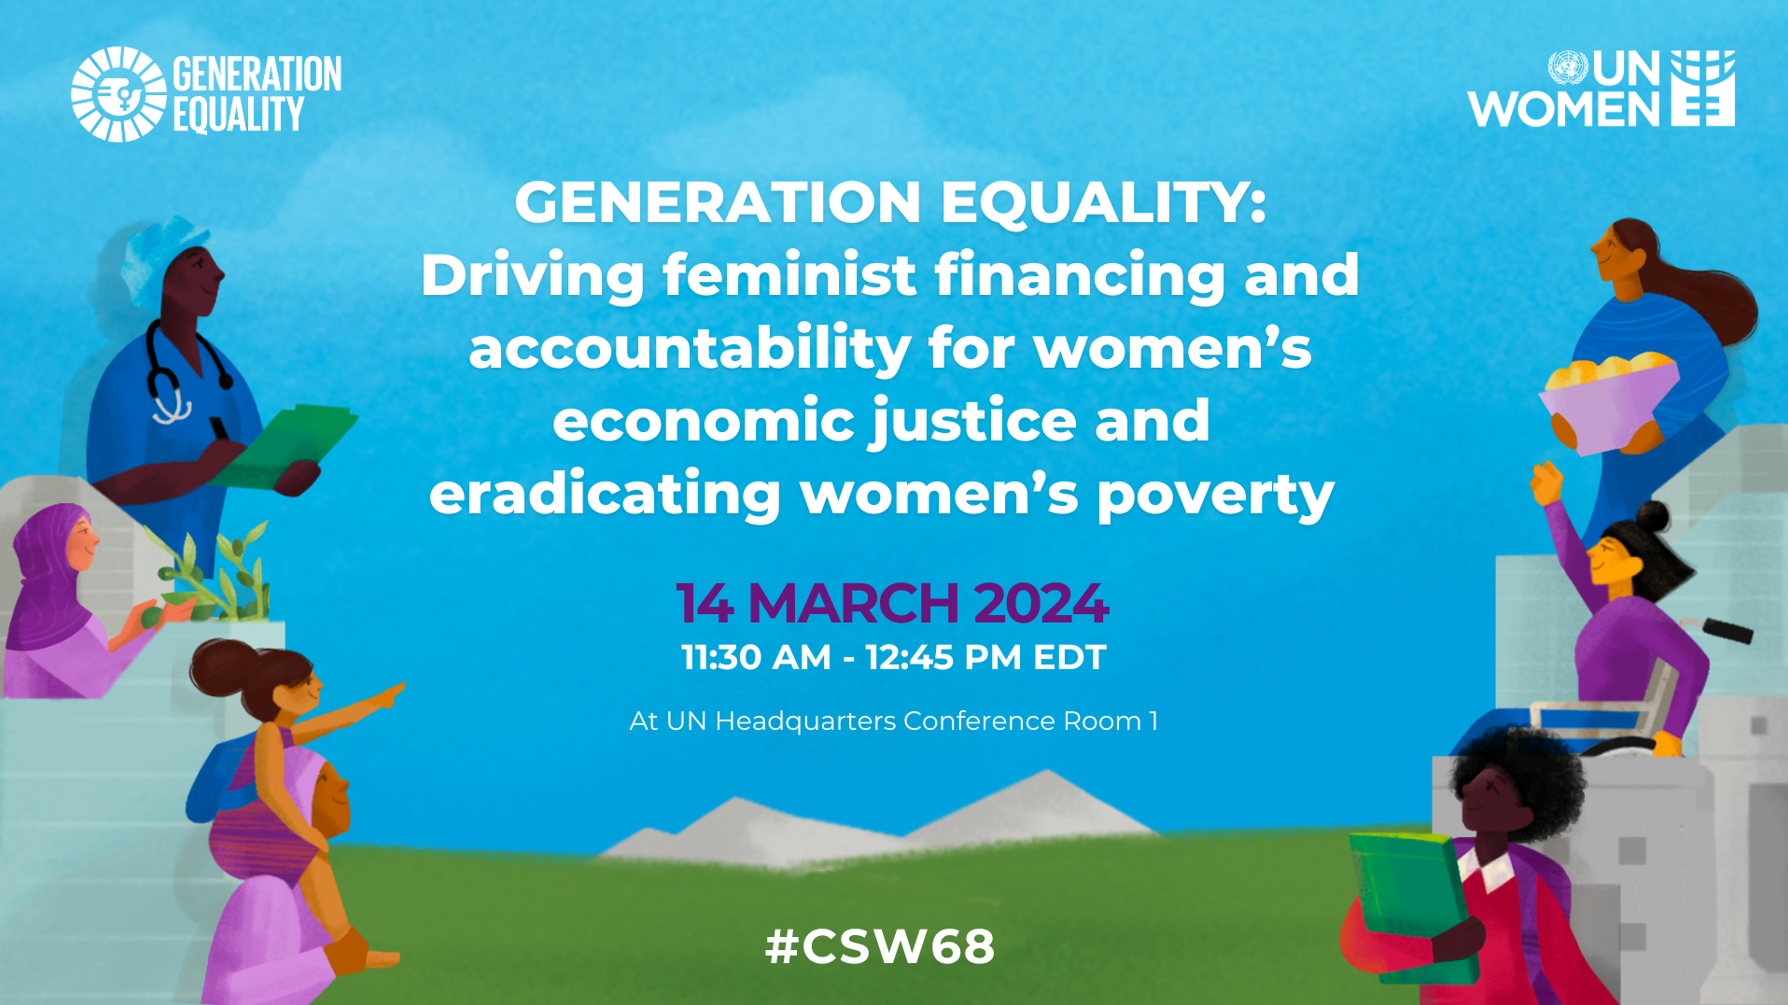 Generation equality CSW68 event